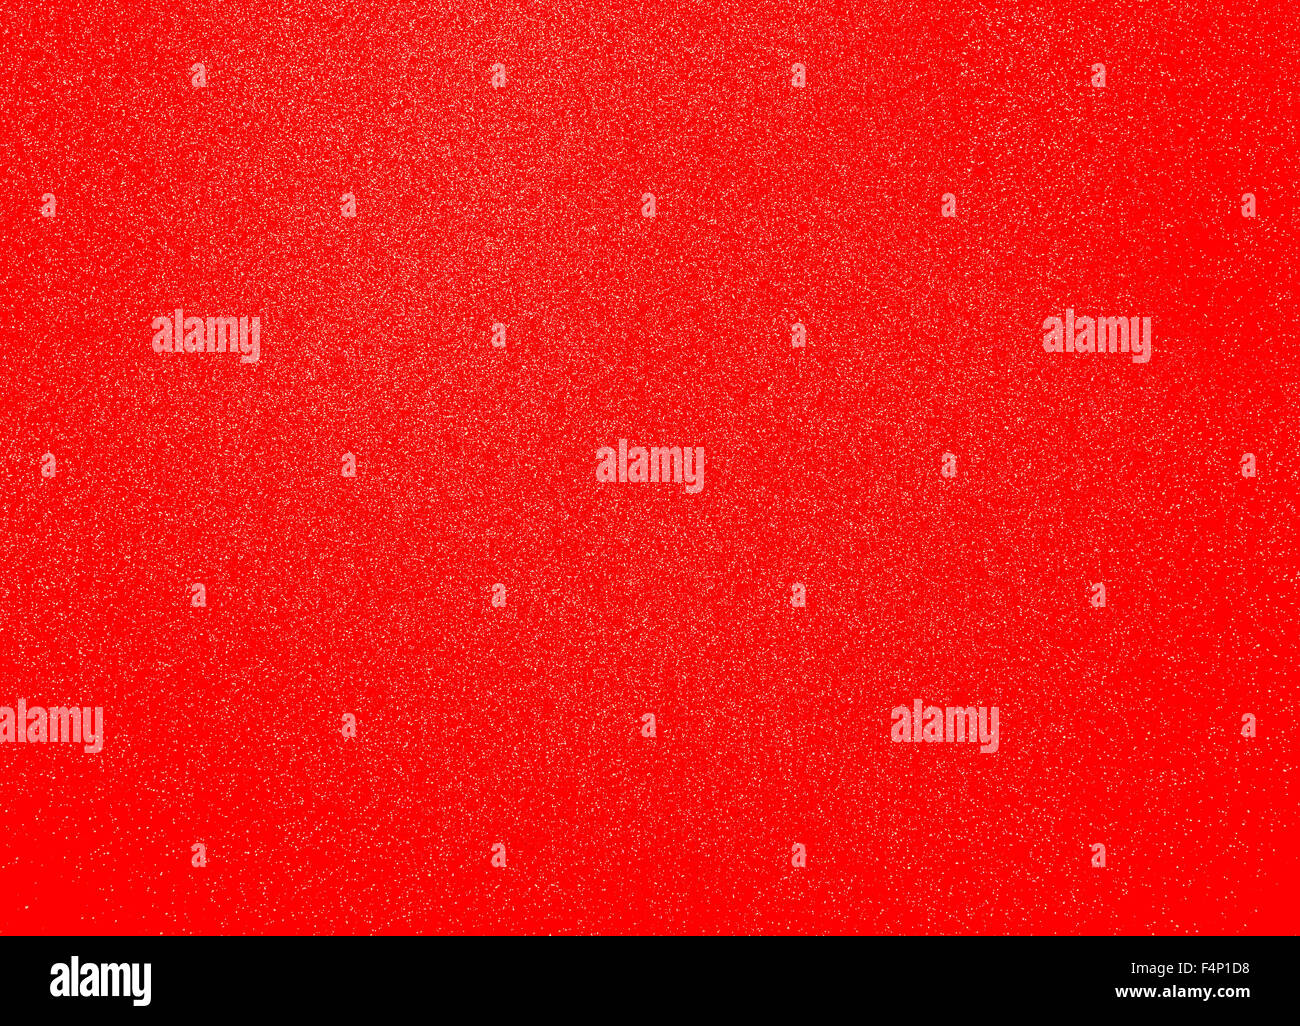 Red background with white dots Stock Photo